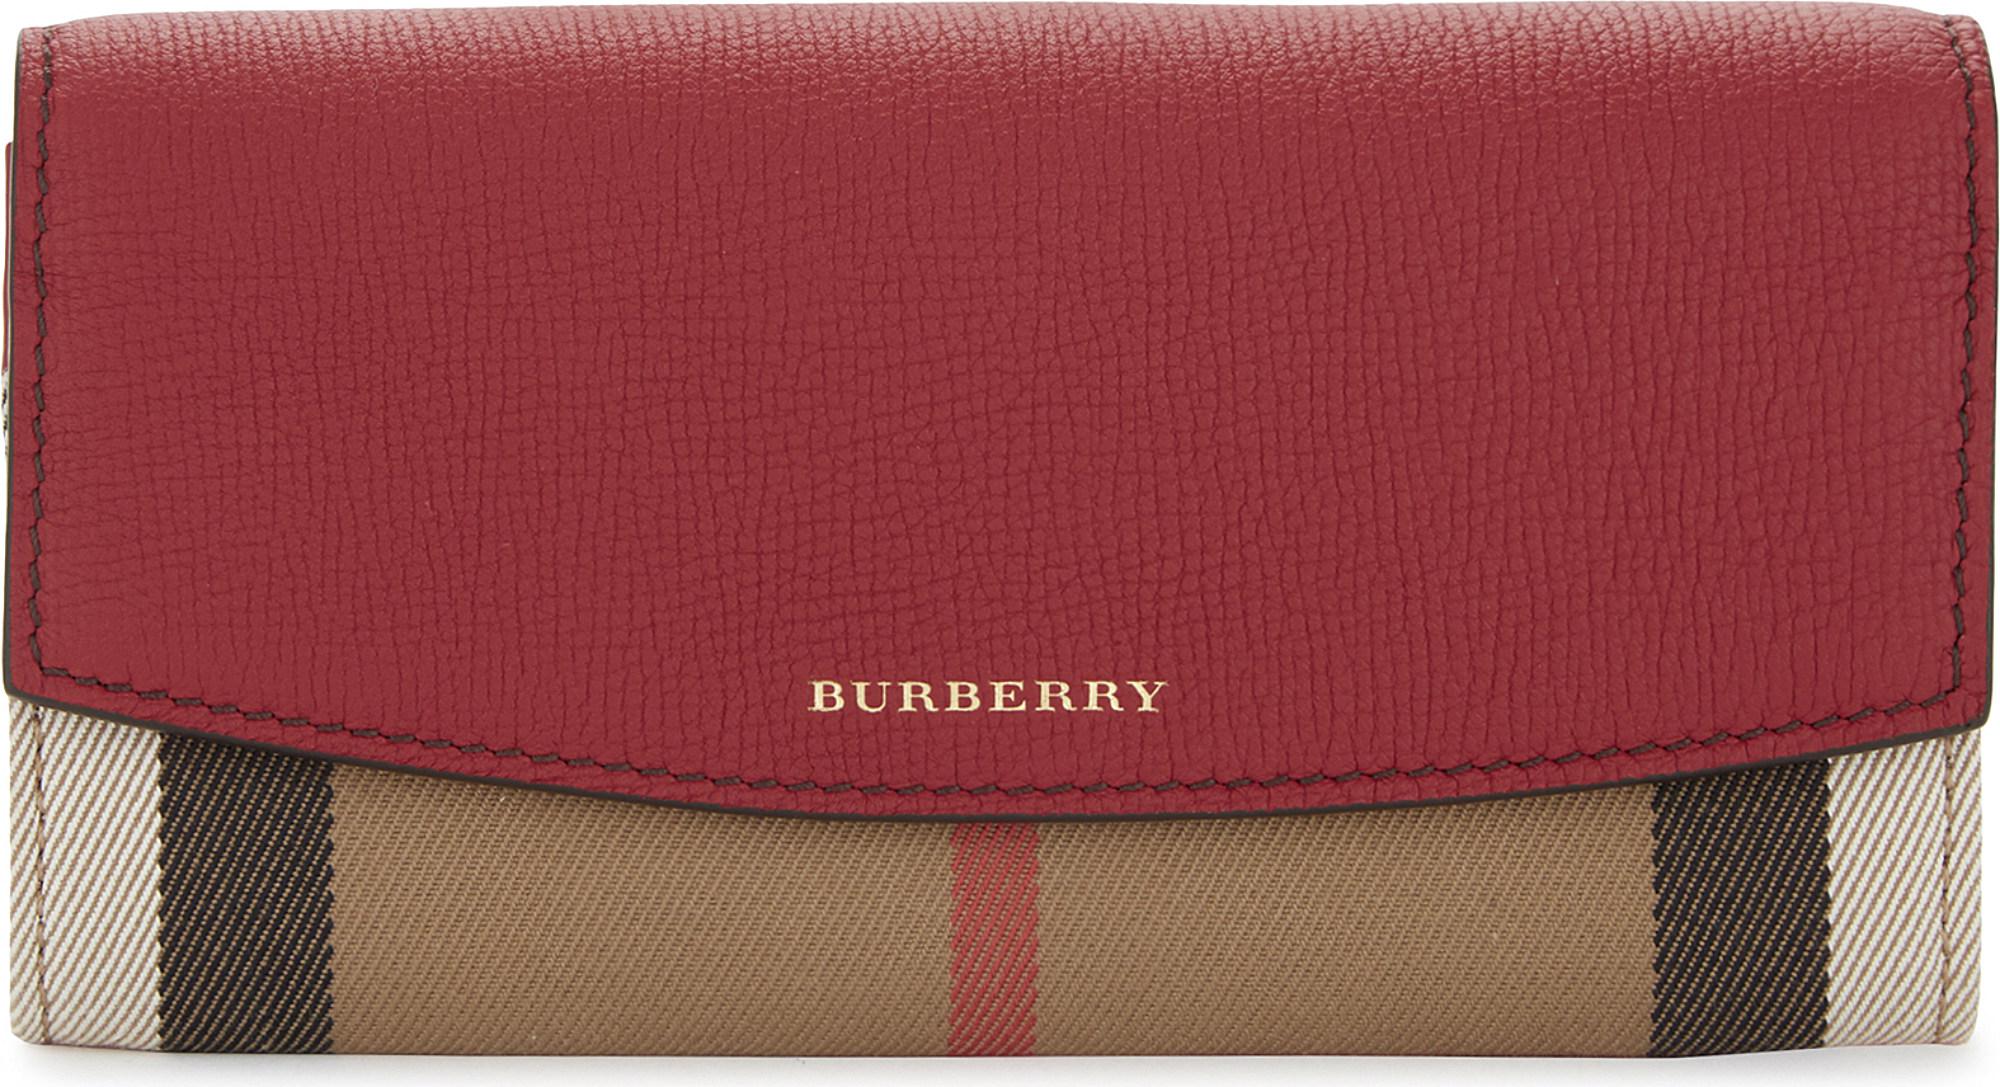 Burberry Porter House Check Leather Wallet in Red | Lyst